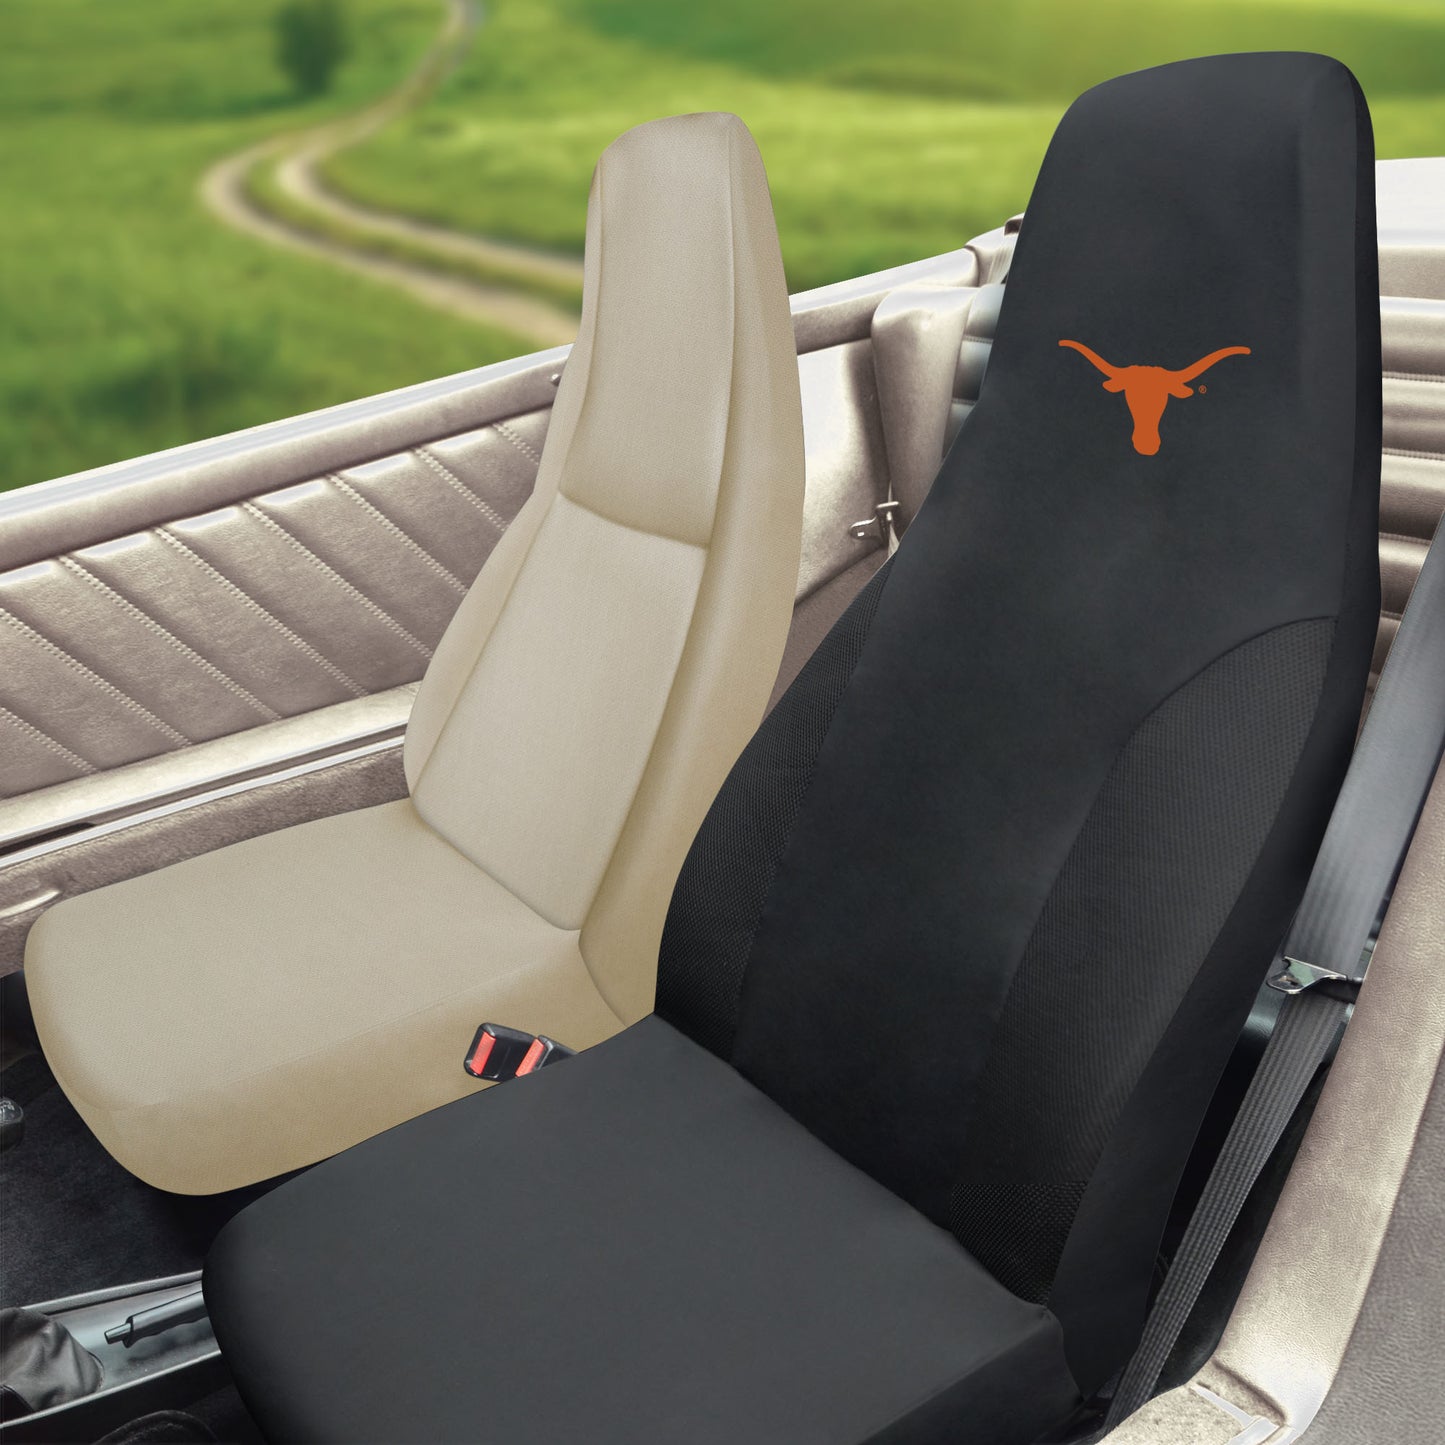 Texas Longhorns Embroidered Seat Cover